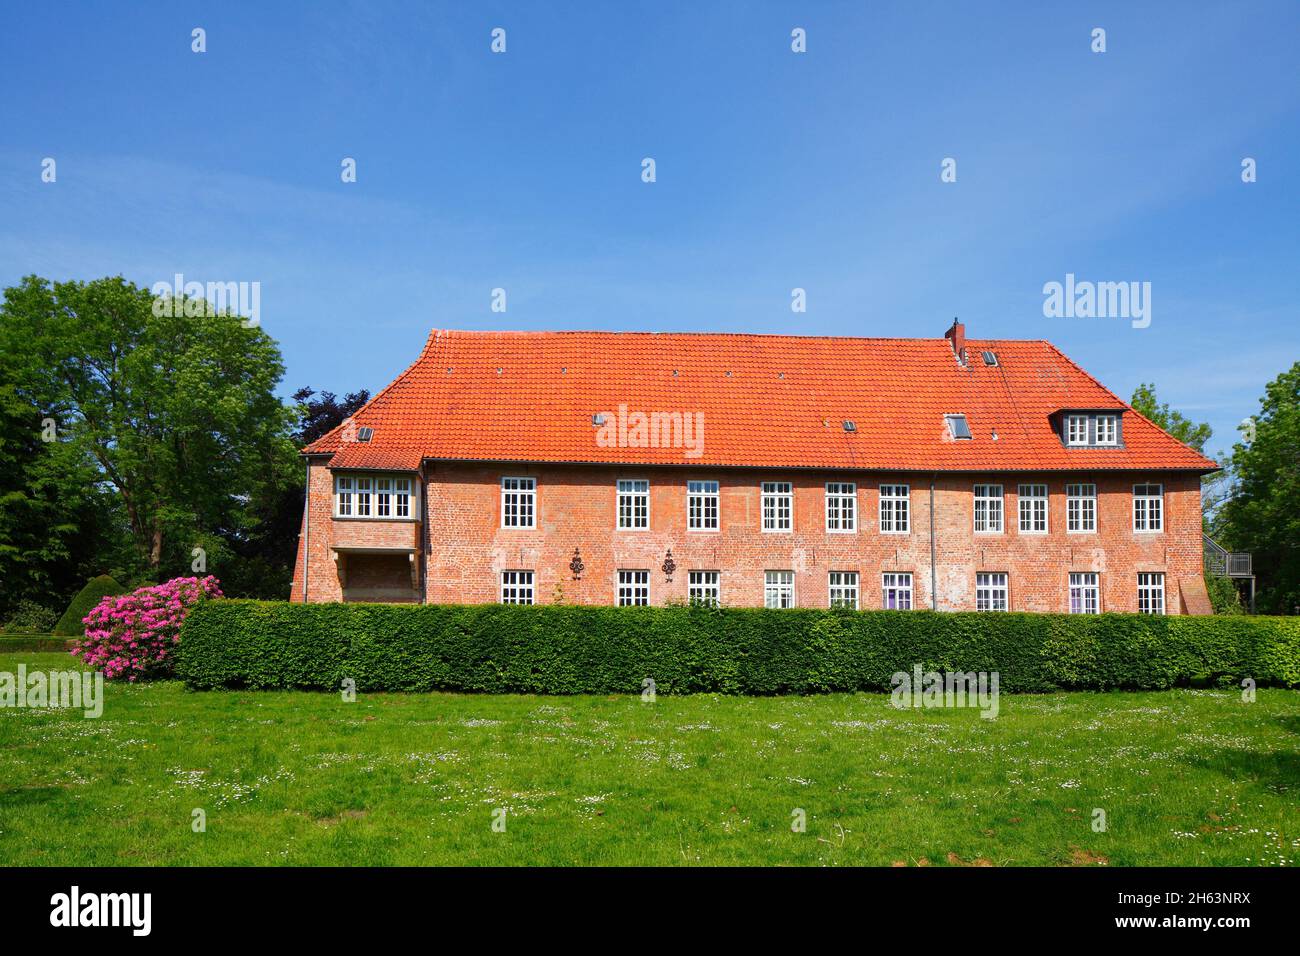 medieval moated castle blomendal in bremen-blumenthal,bremen,germany,europe Stock Photo